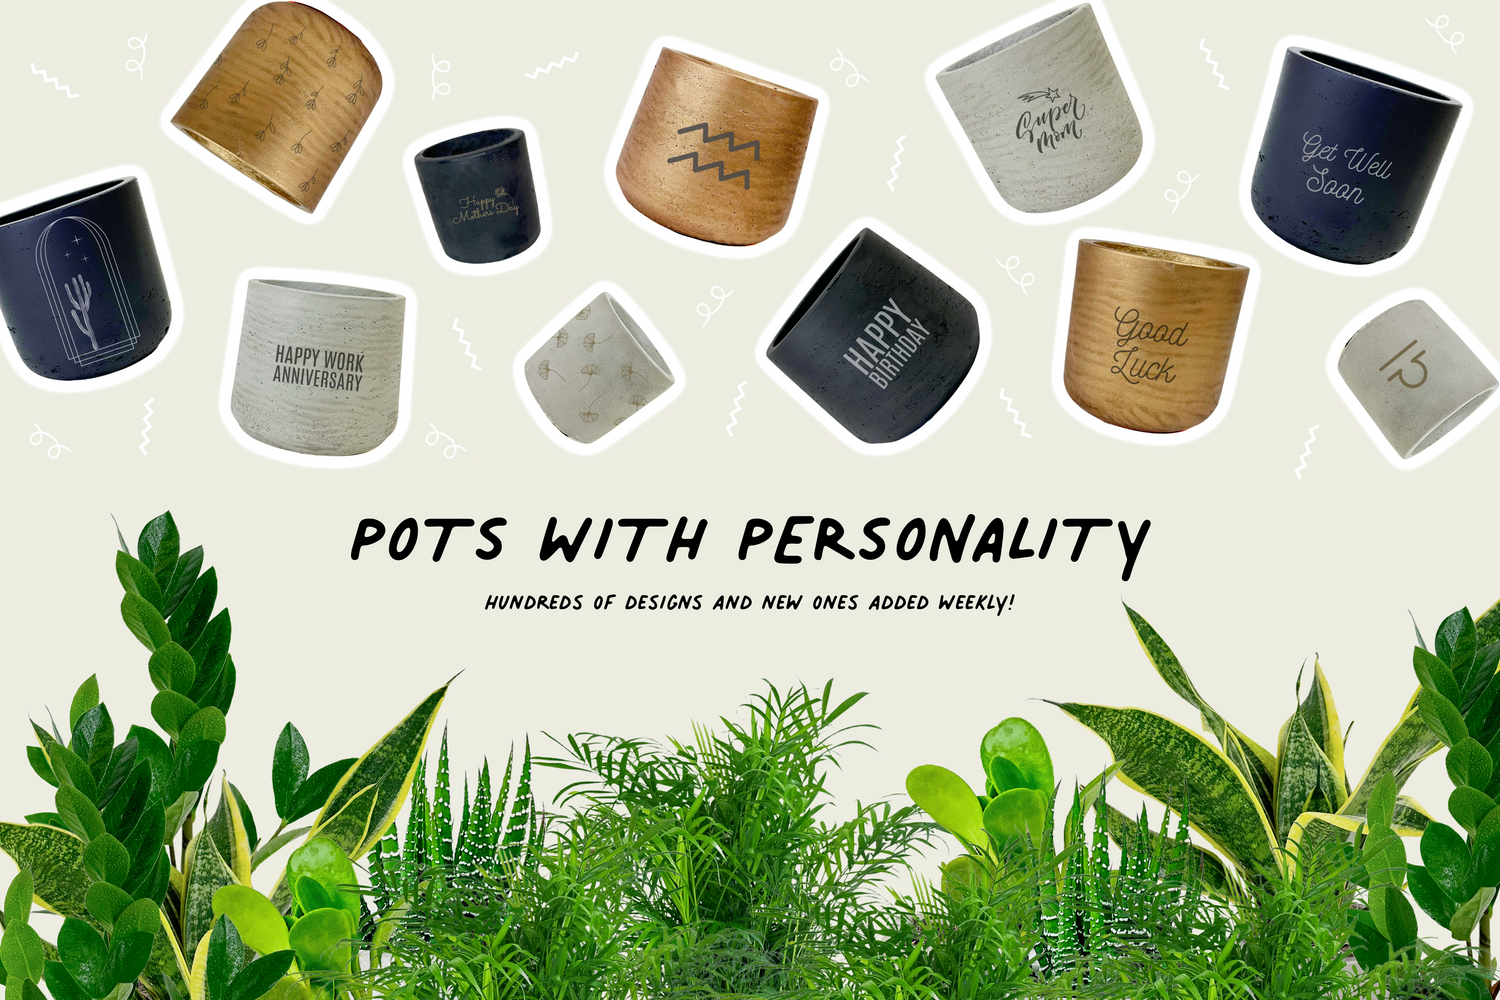 Pots with Personality. Hundreds of Designs and new designs added weekly!